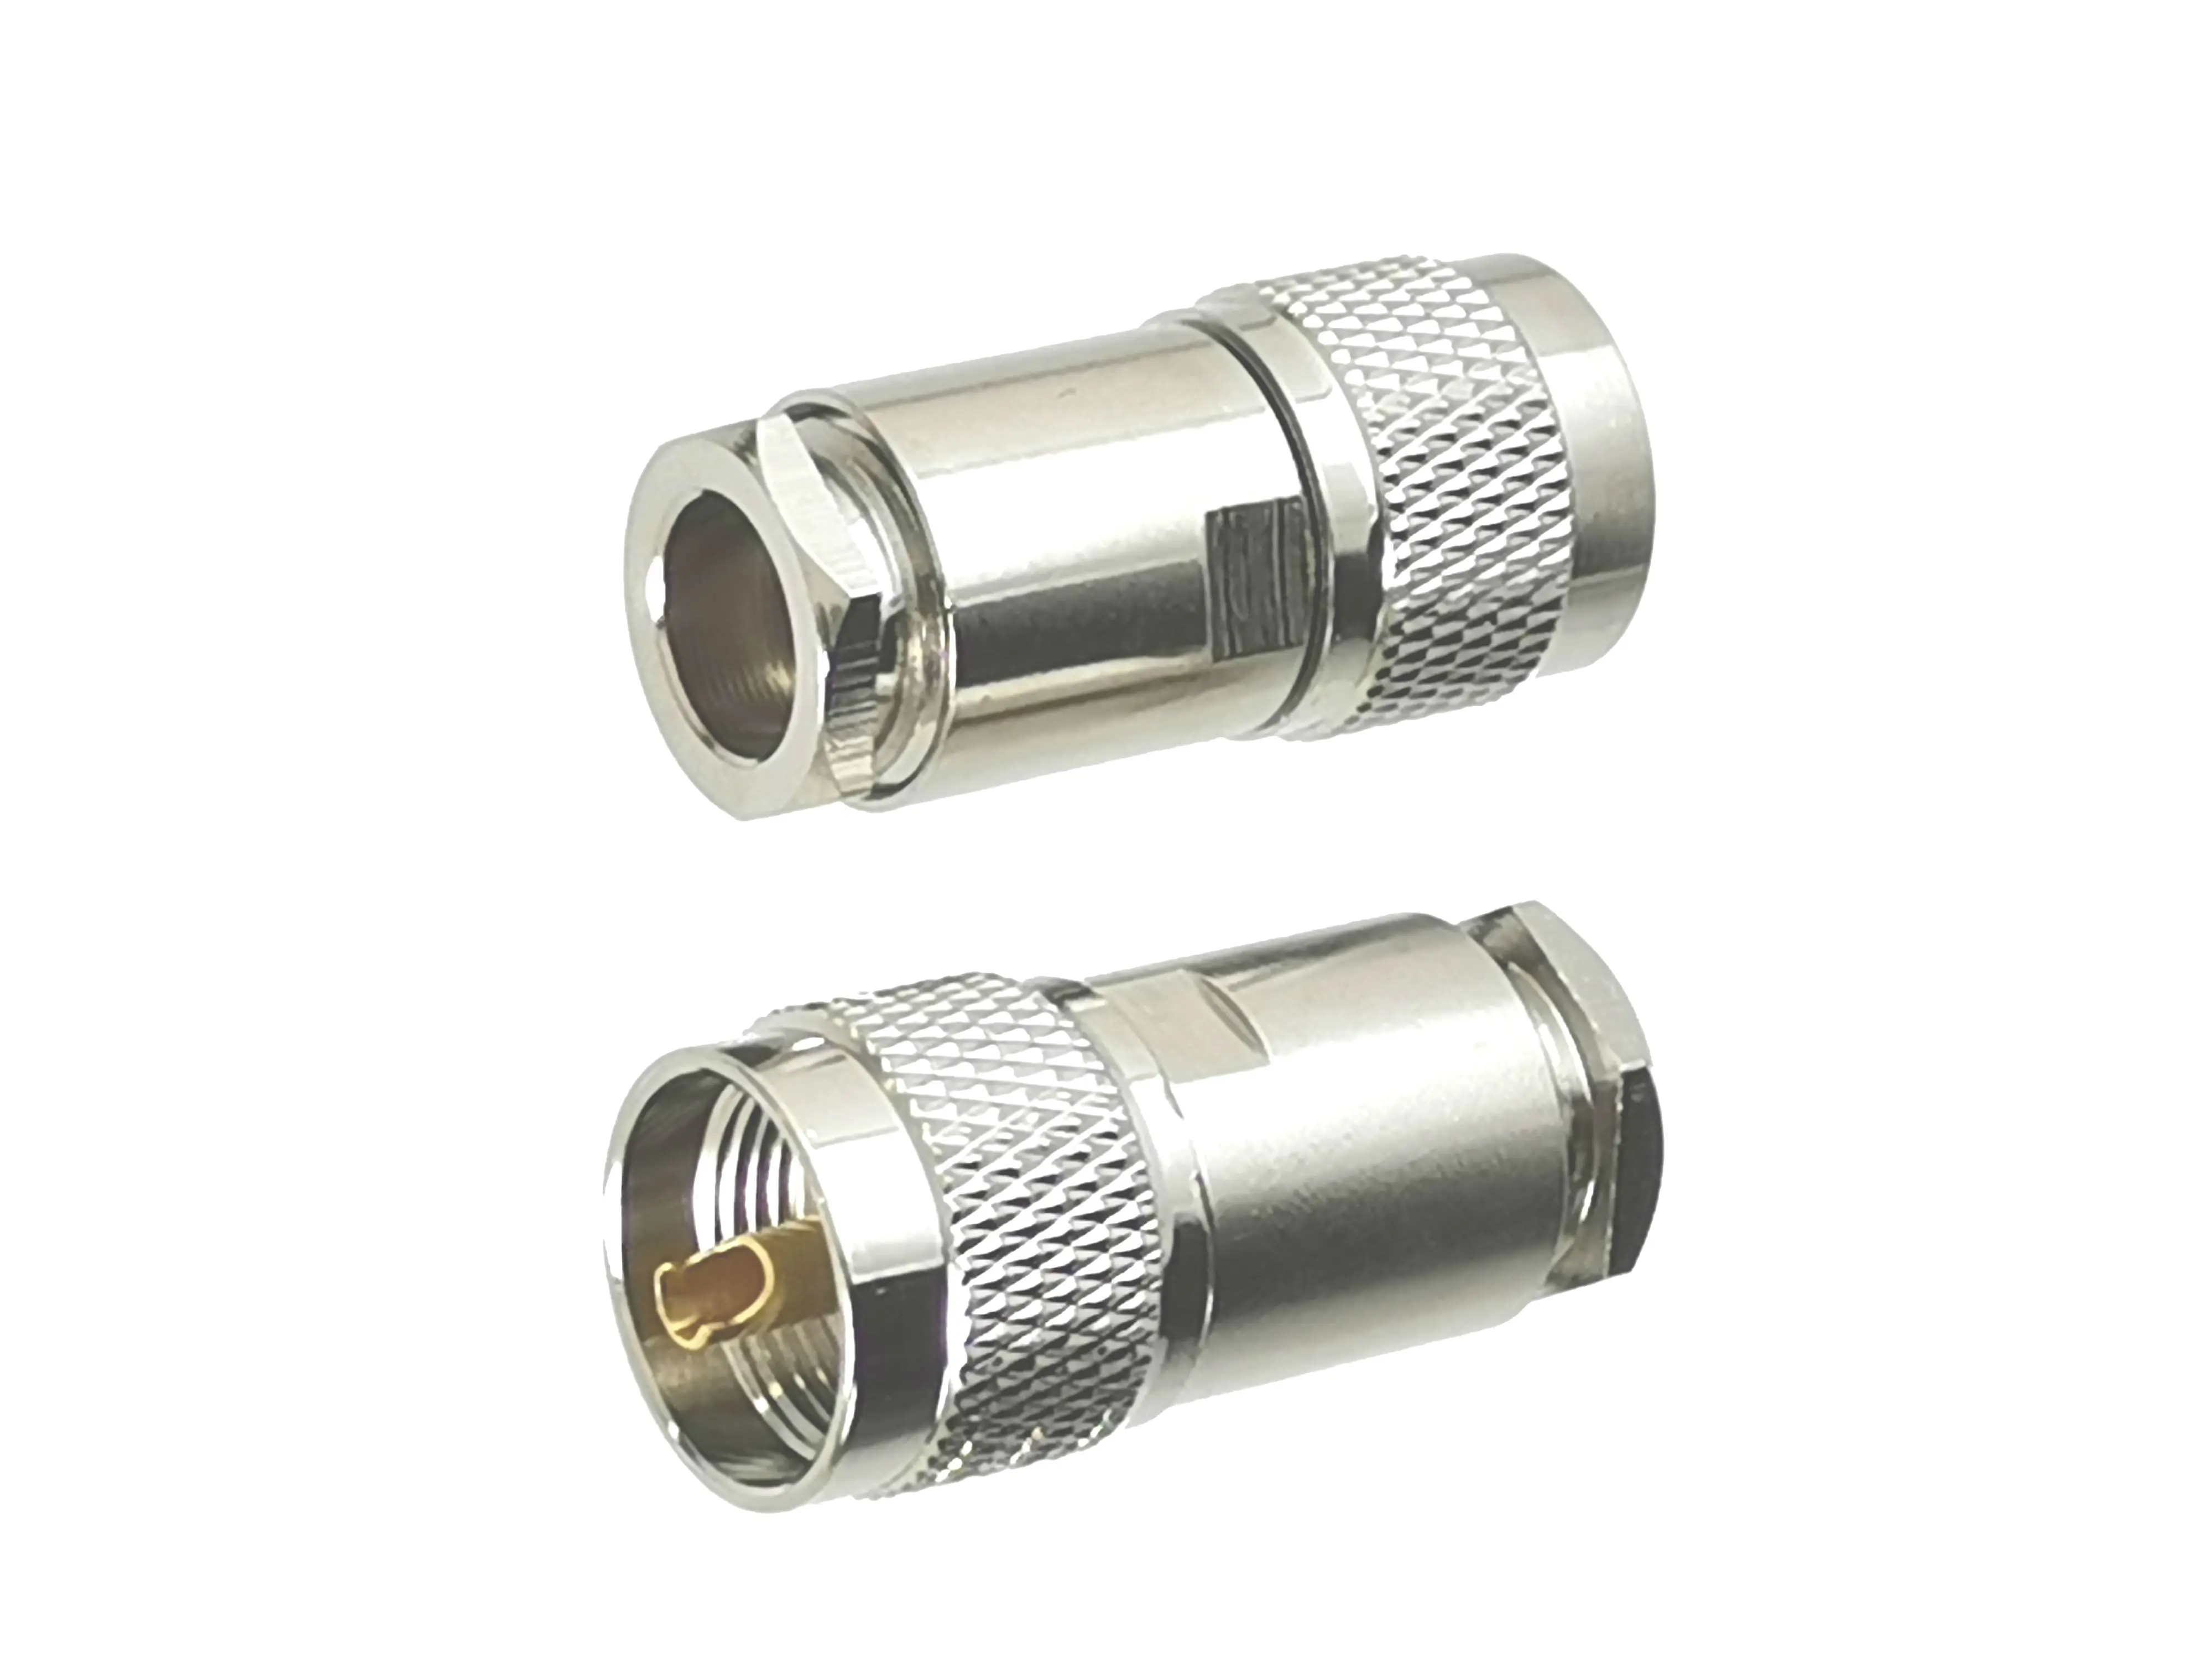 1pcs UHF PL259 Male Plug Connector Clamp RG8 LMR400 7D-FB RG213 Cable RF Coaxial Brass Straight New